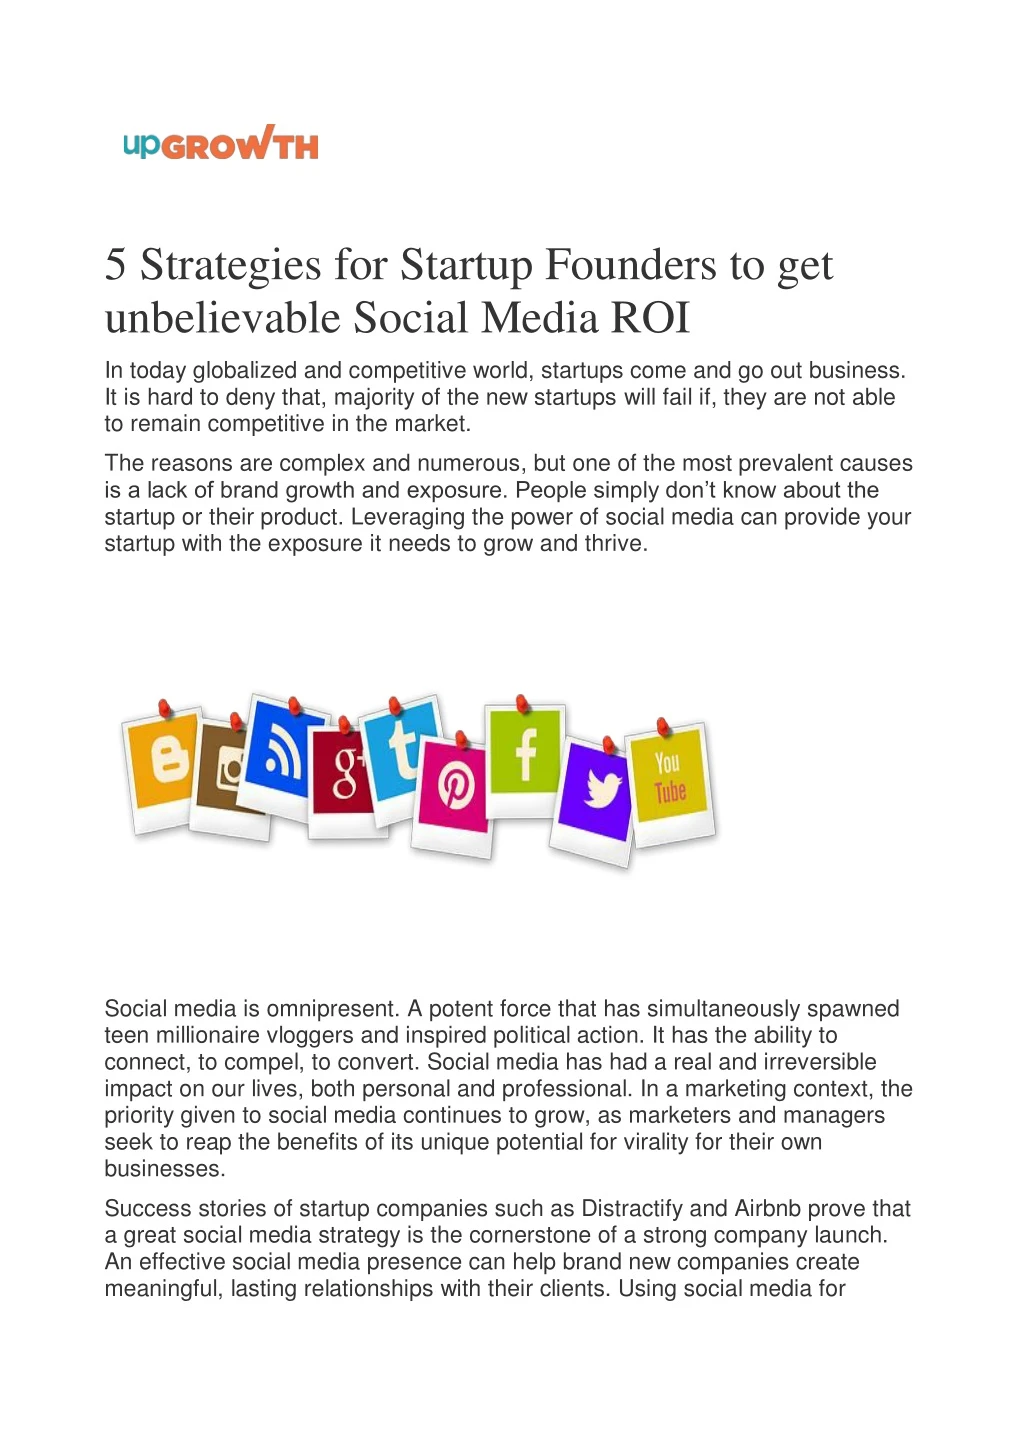 5 strategies for startup founders